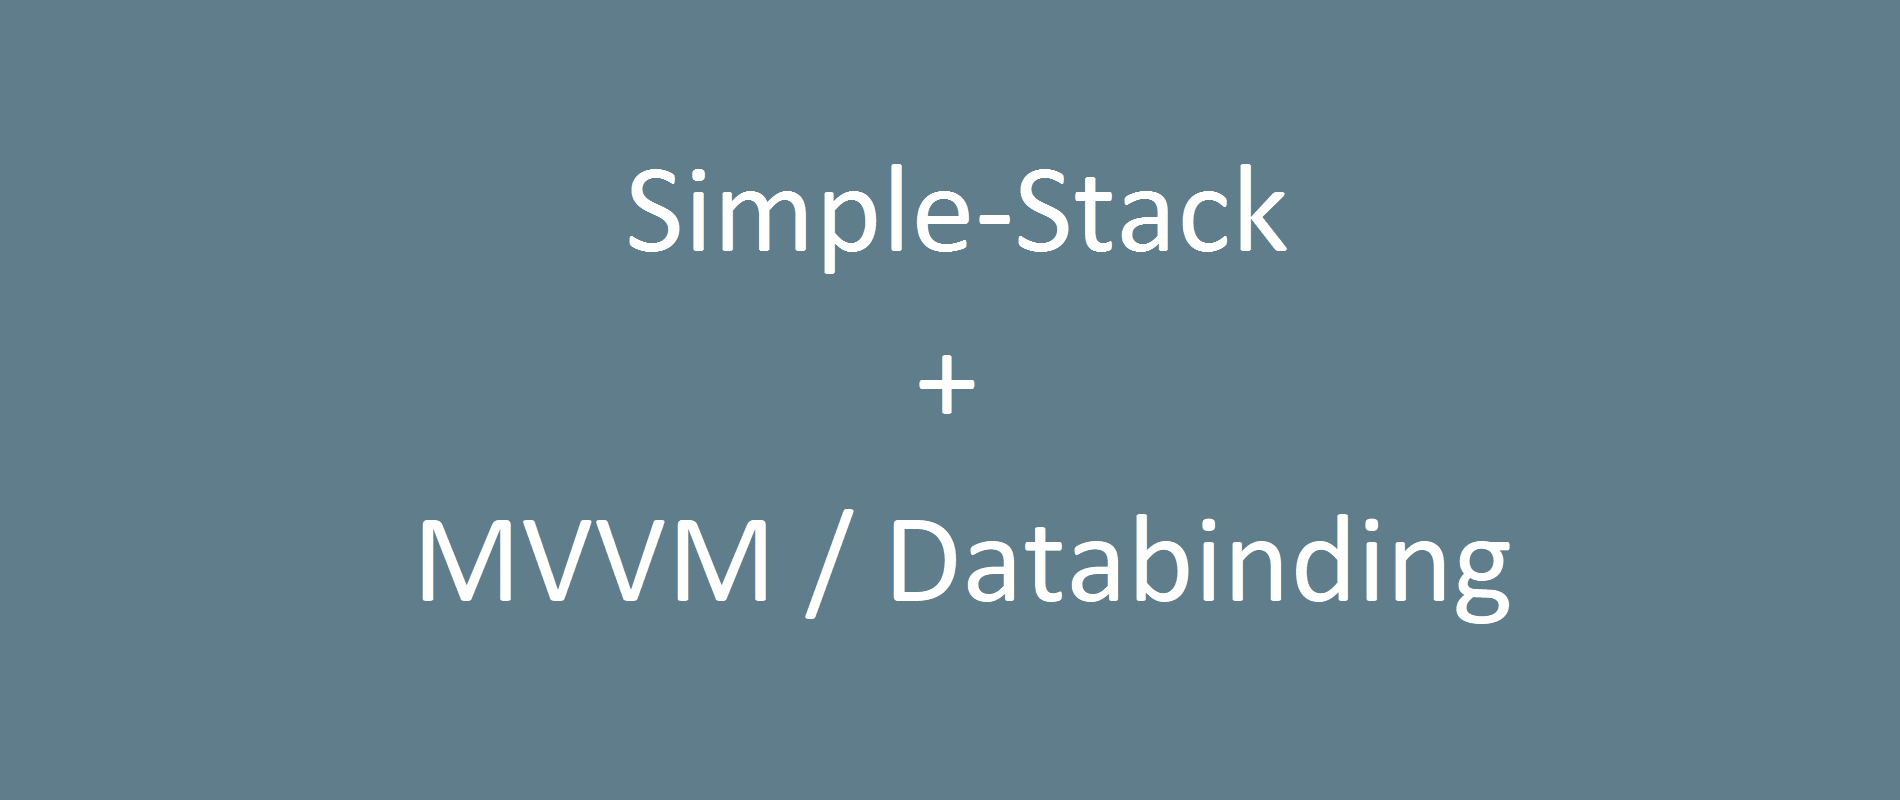 A look at MVVM and Data-binding with Simple-Stack | by Gabor Varadi |  ProAndroidDev